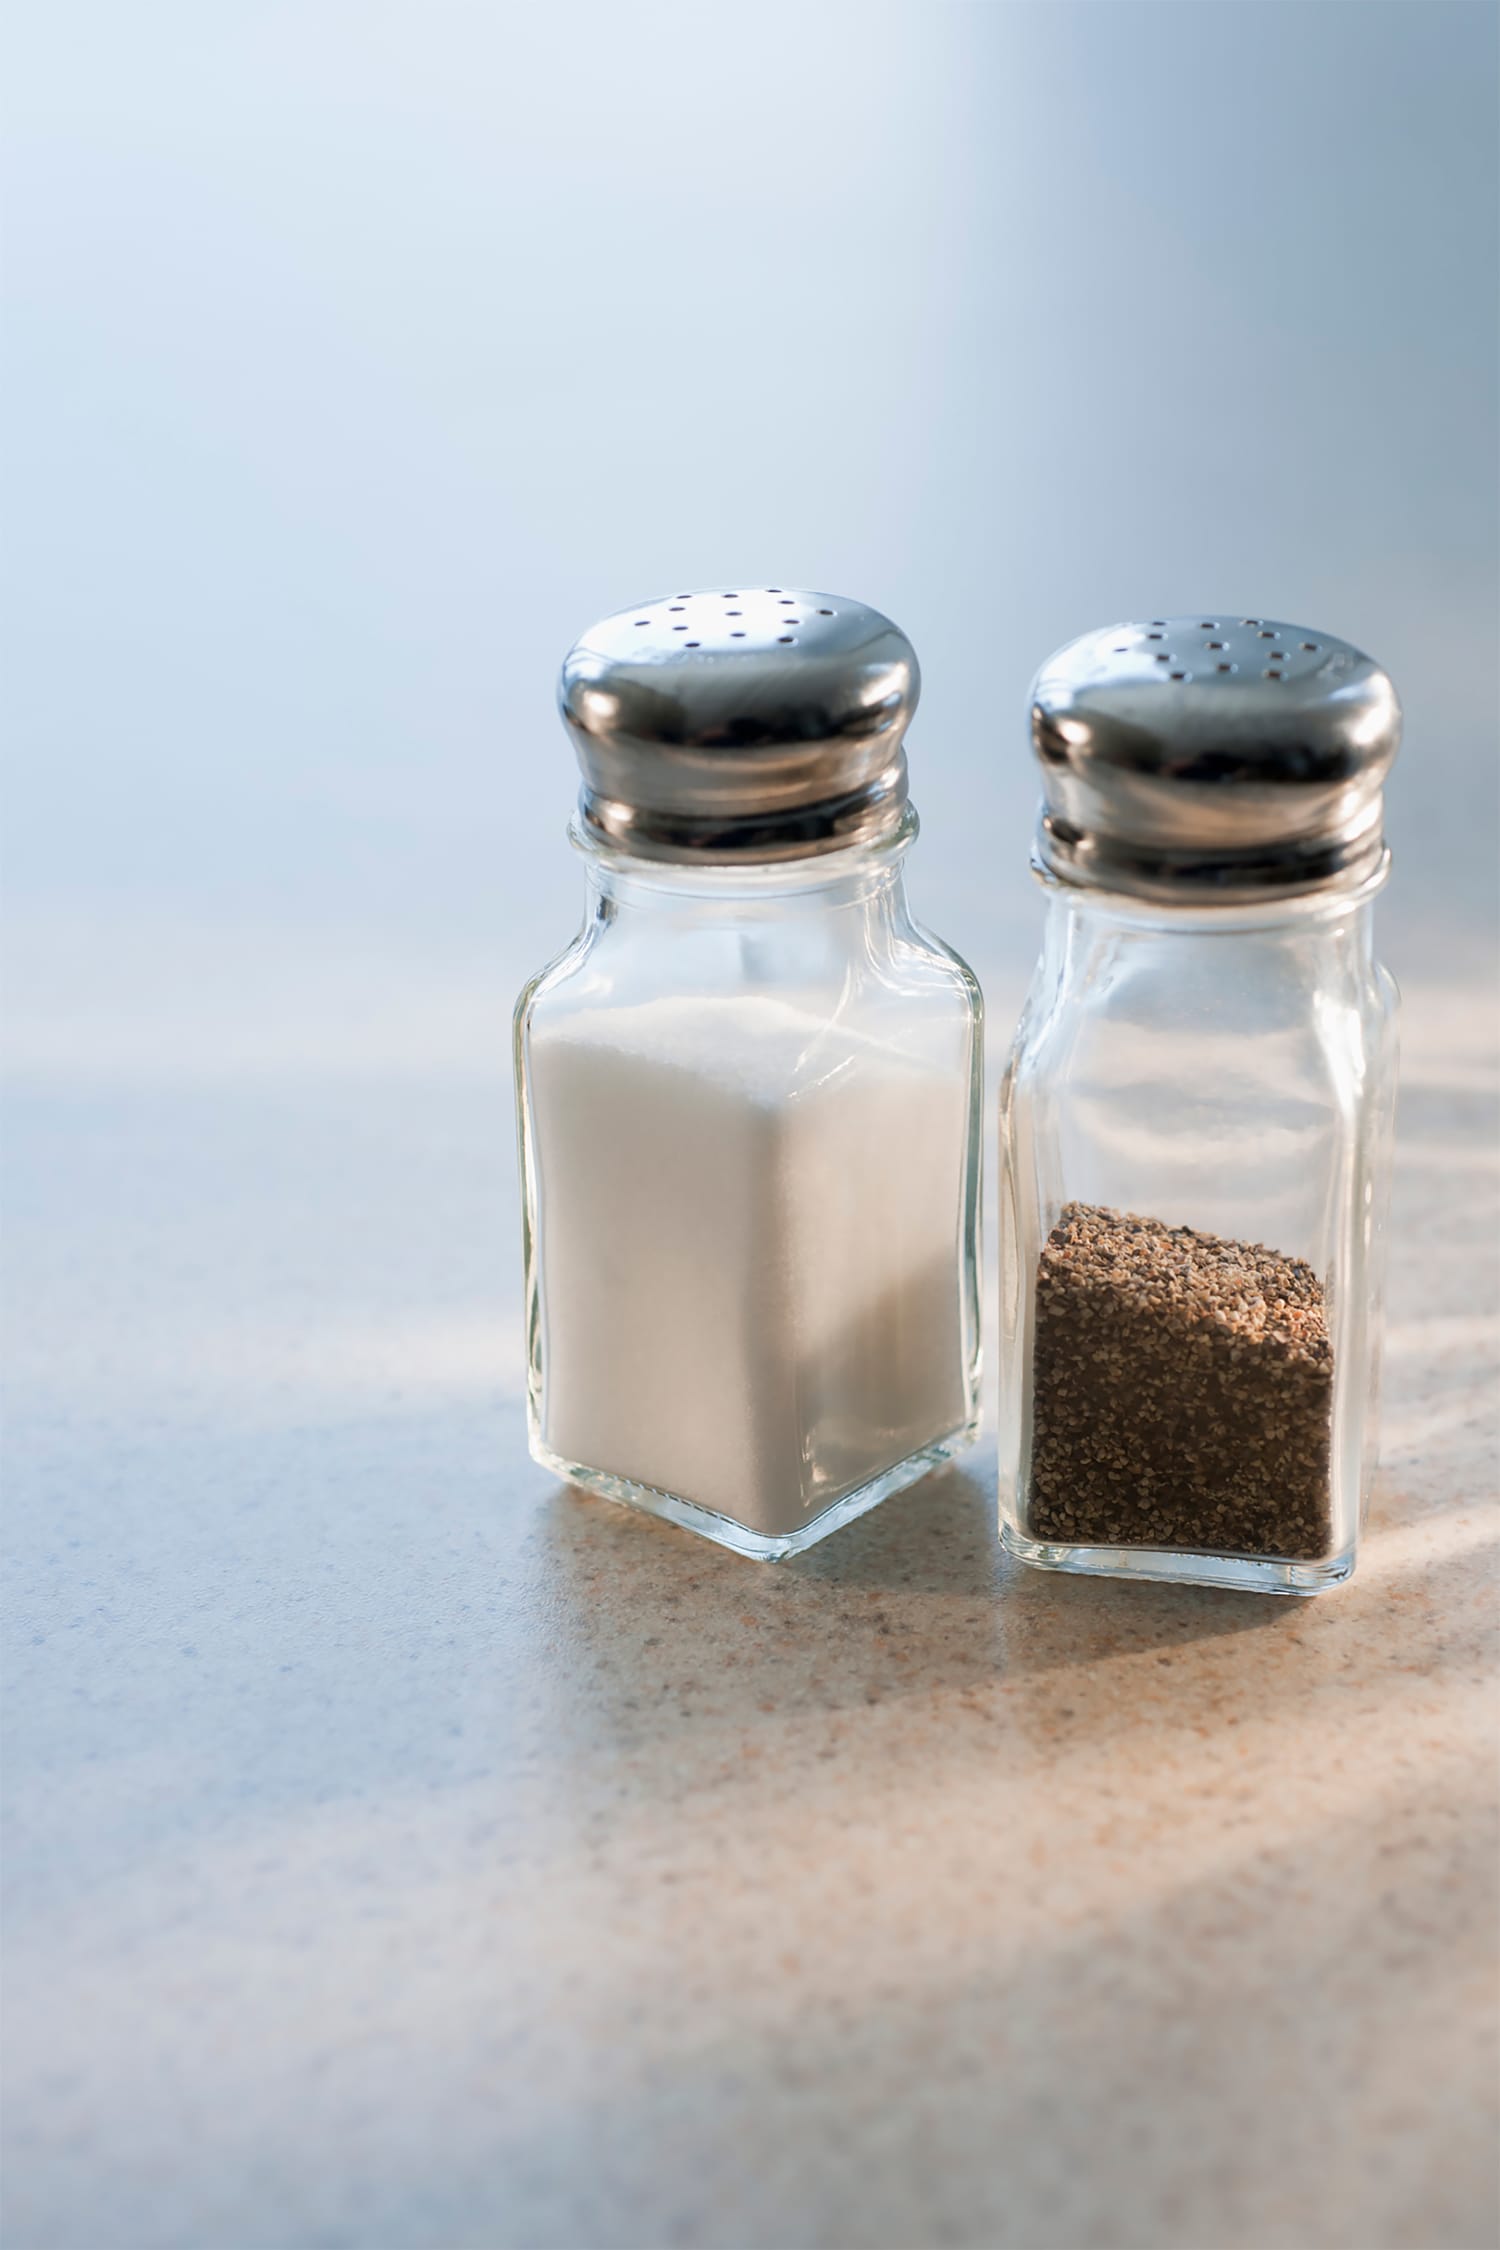 People Are Just Discovering This Not-So-Hidden Salt Shaker Feature, and Everyone Is Speechless